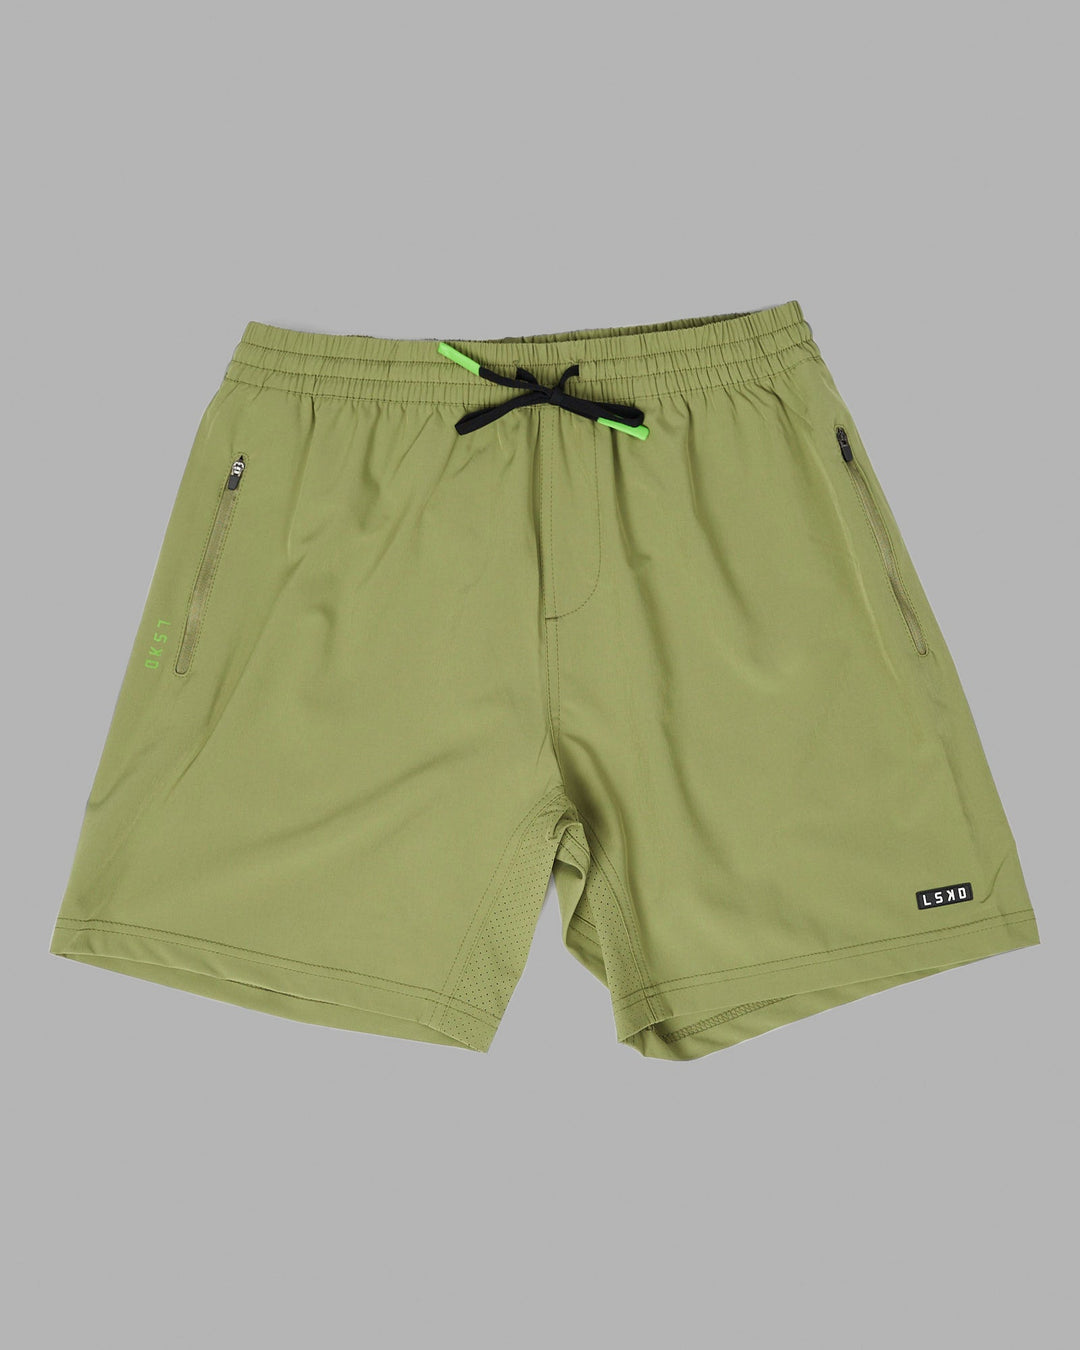 Rep 7'' Performance Short - Moss Stone-Lime